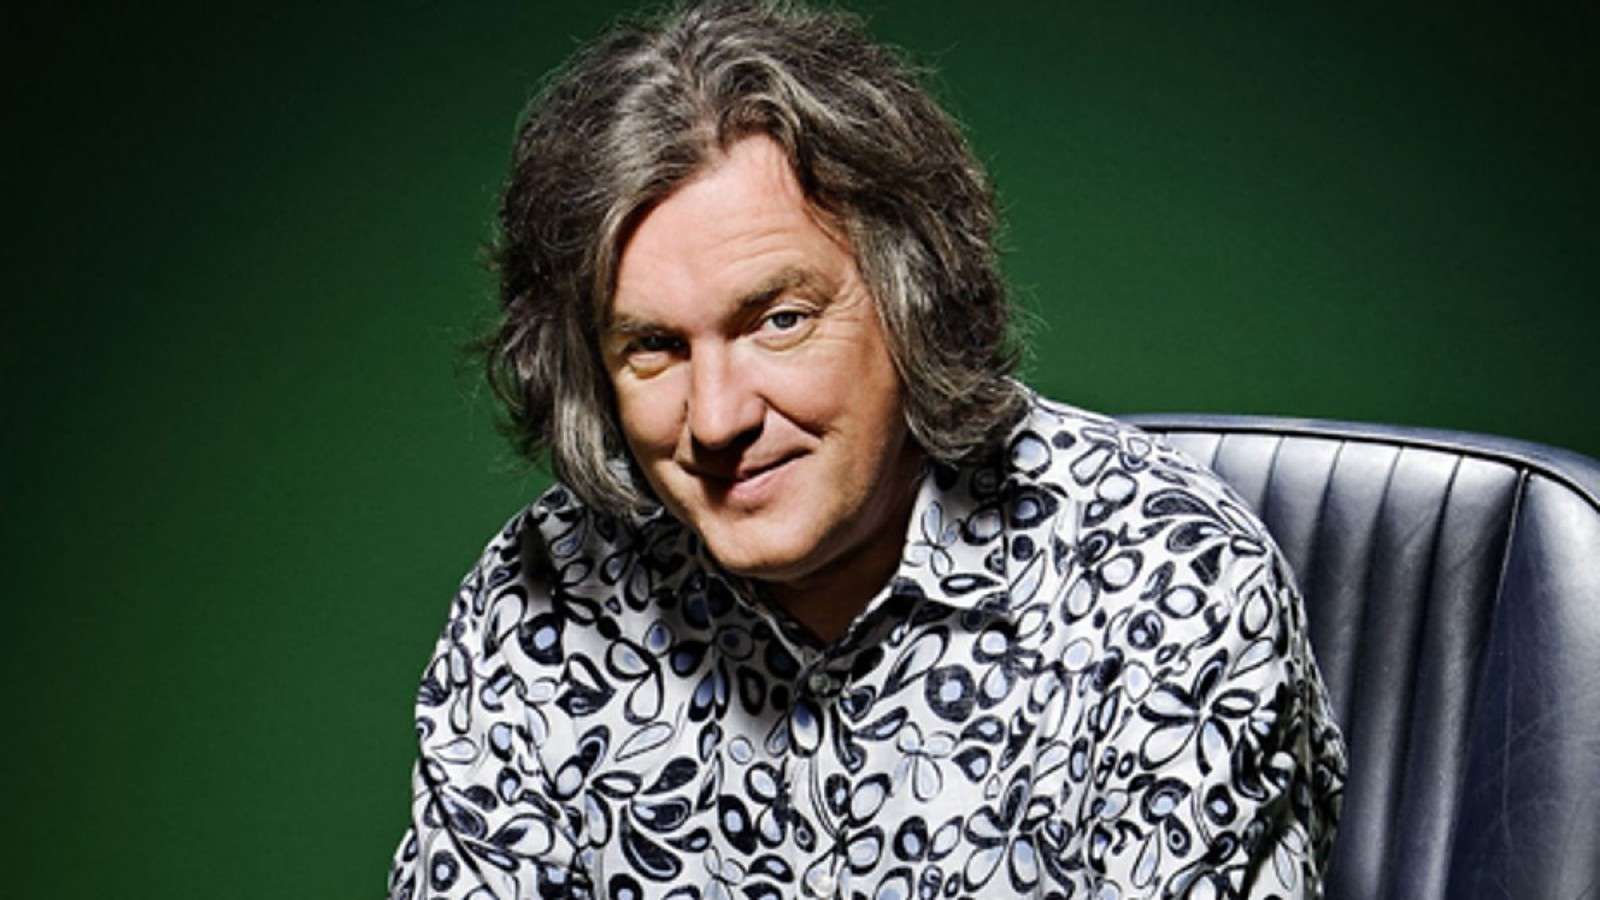 James May sitting in a Top Gear chair.